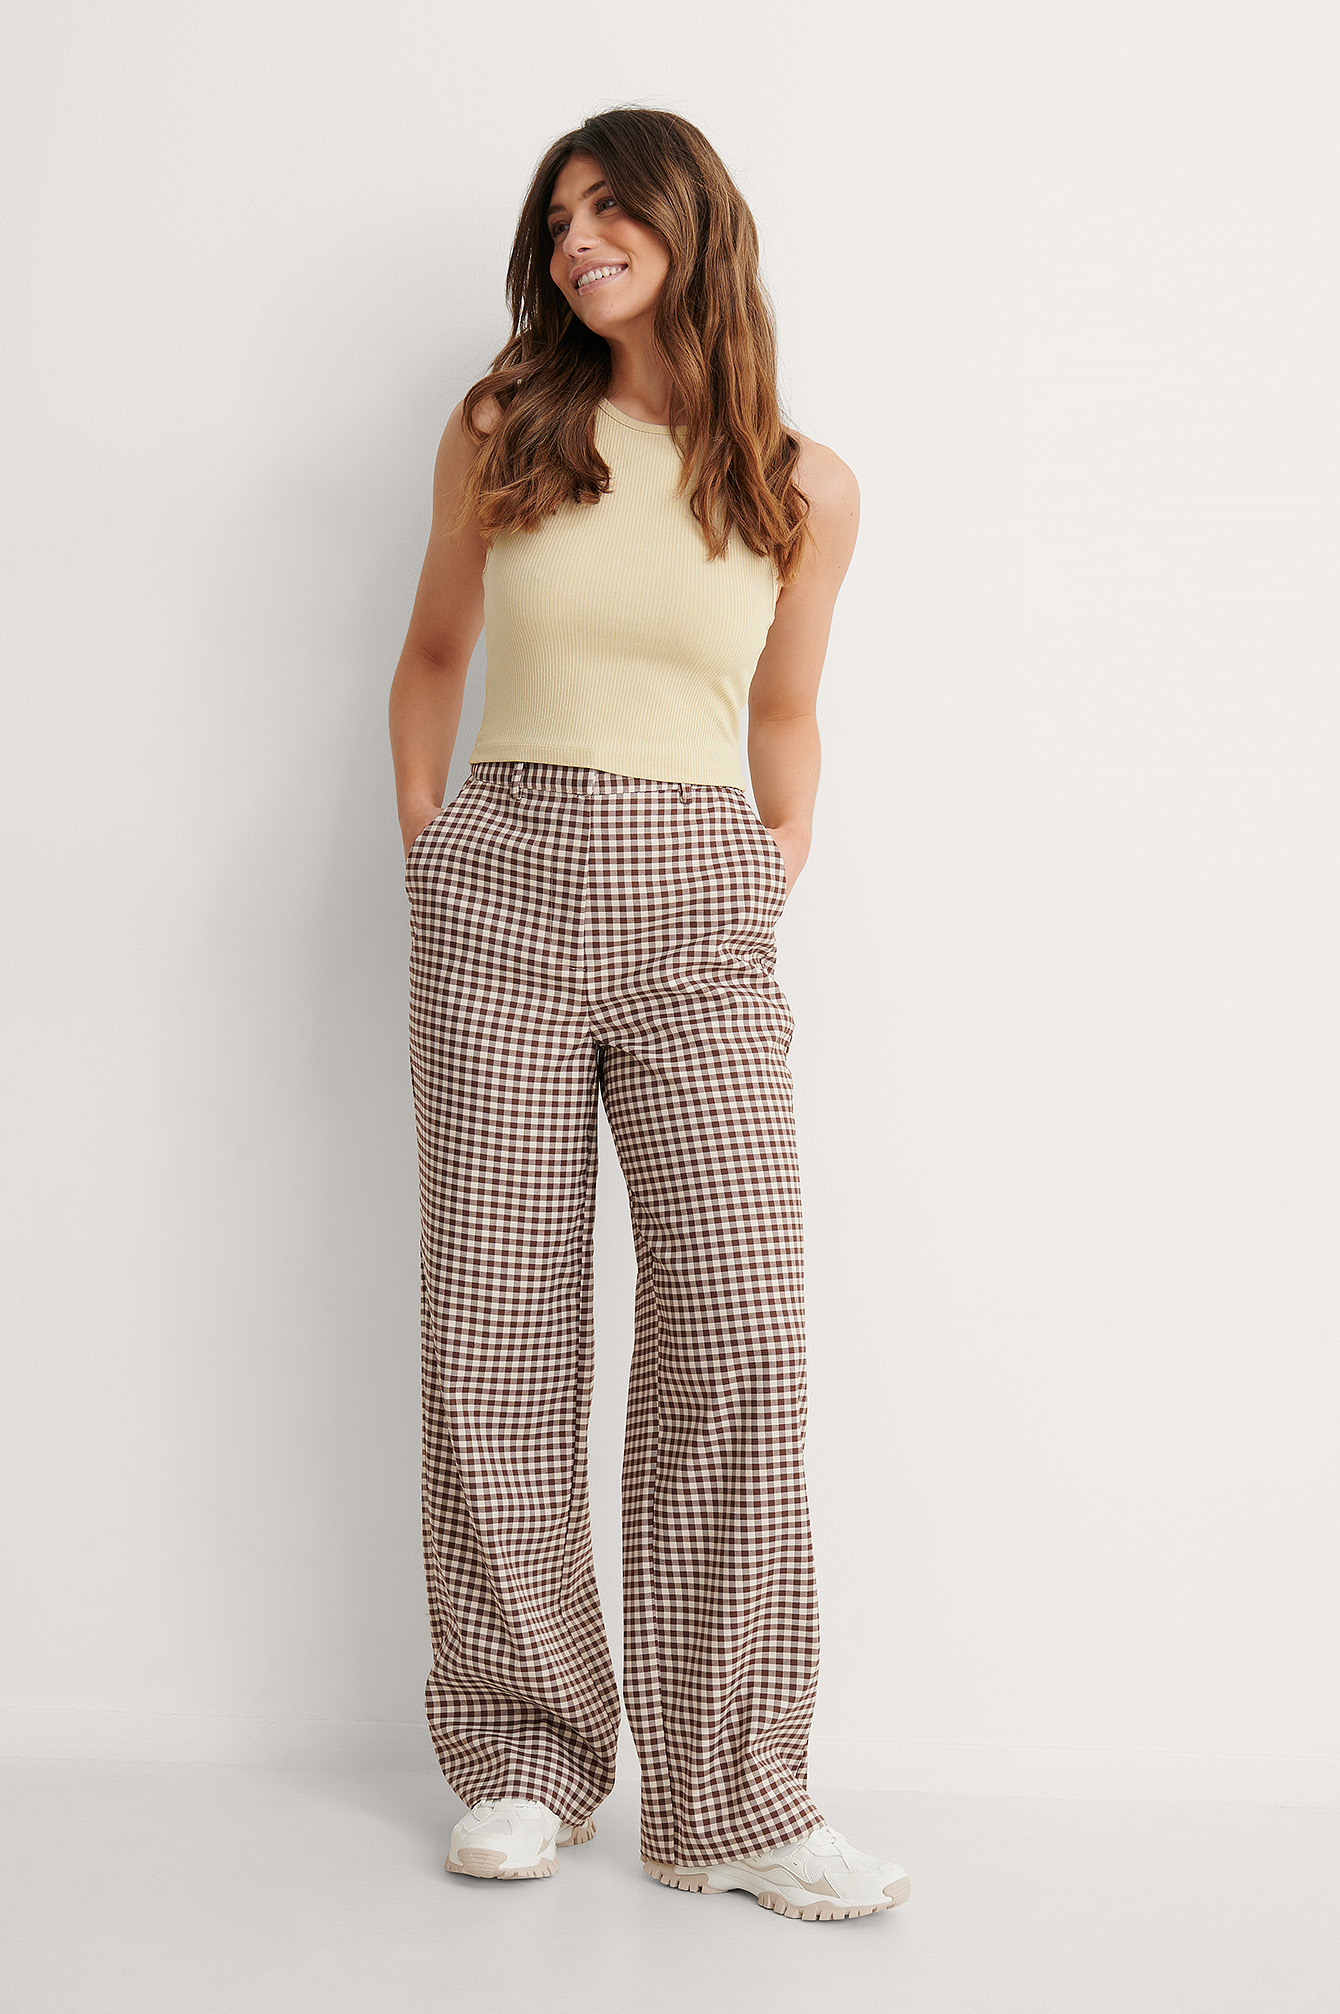 Checked Suit Pants Outfit